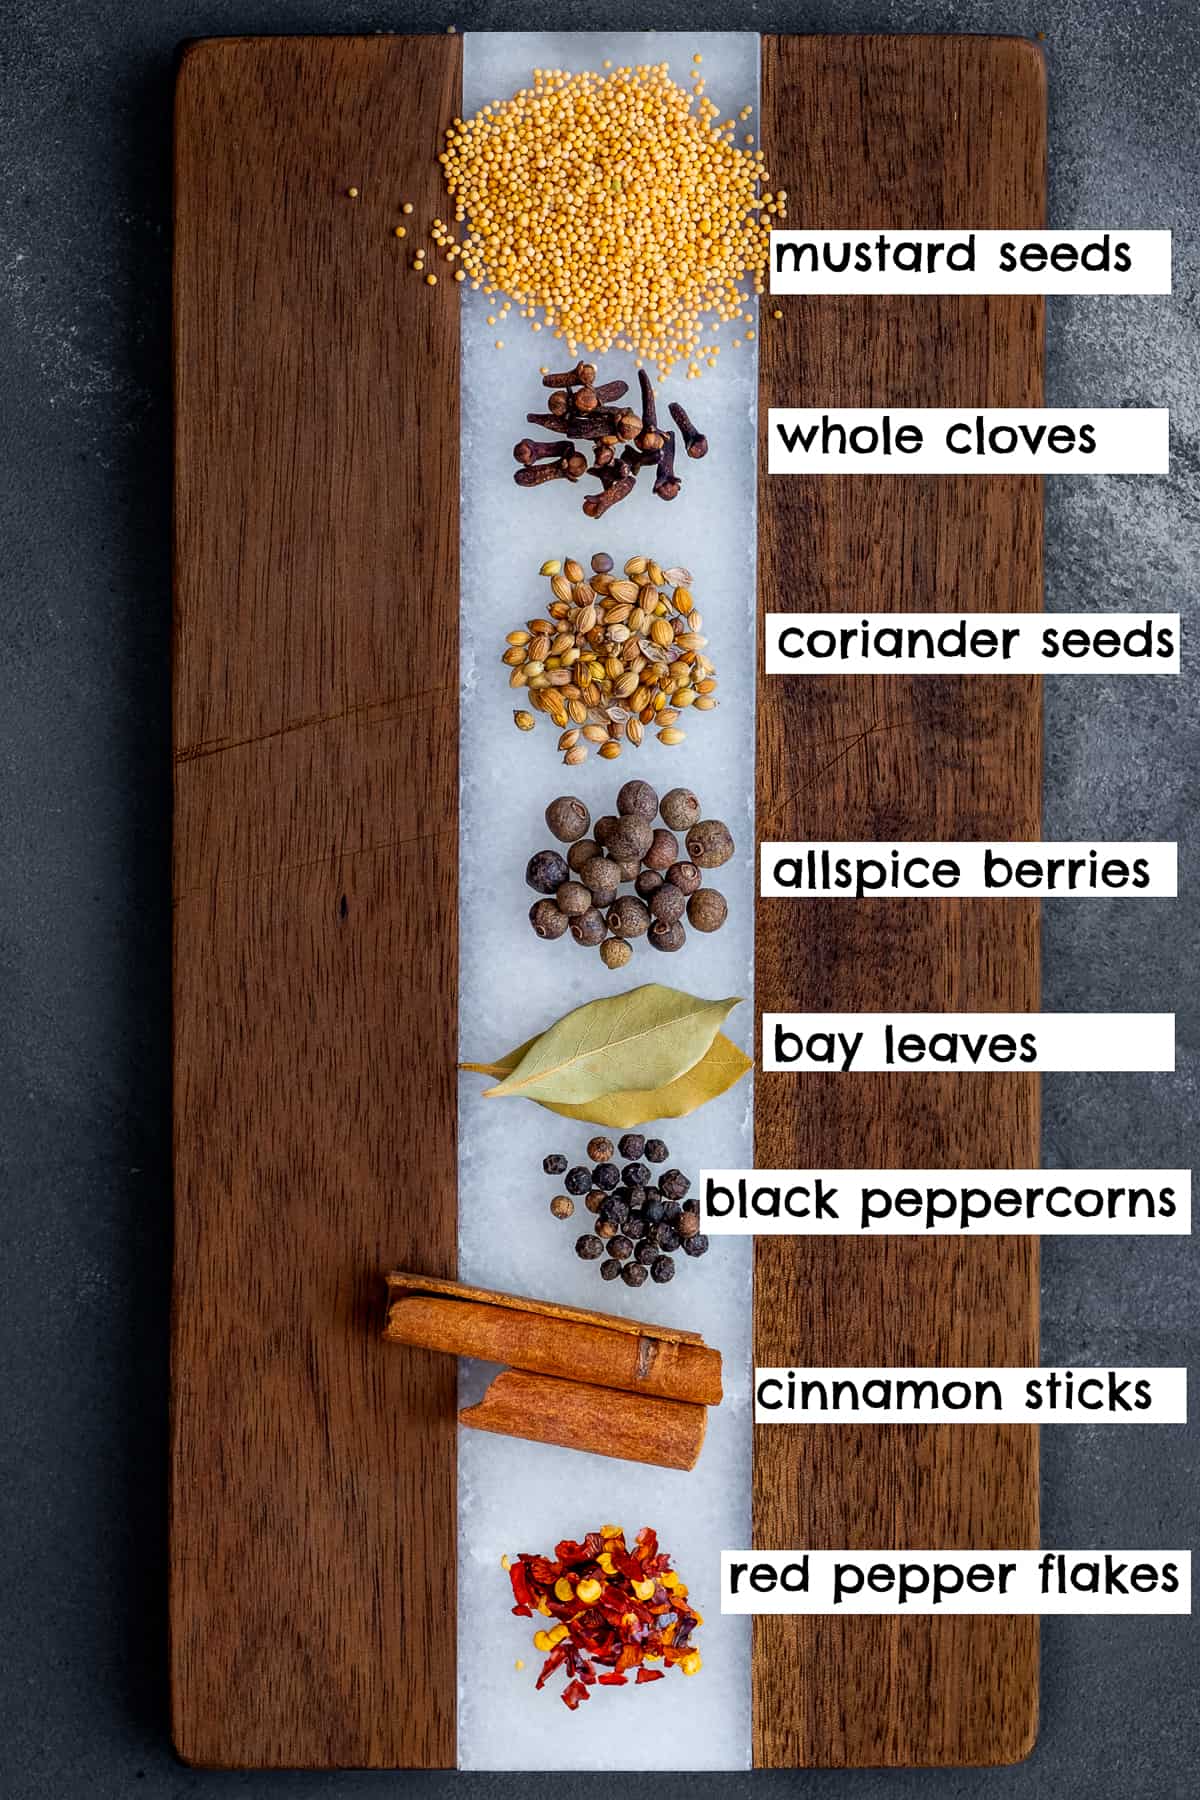 Coriander seeds, mustard seeds, whole cloves, allspice berries, bay leaves, black peppercorns, cinnamon sticks and red pepper flakes placed separately on a wooden cutting board.